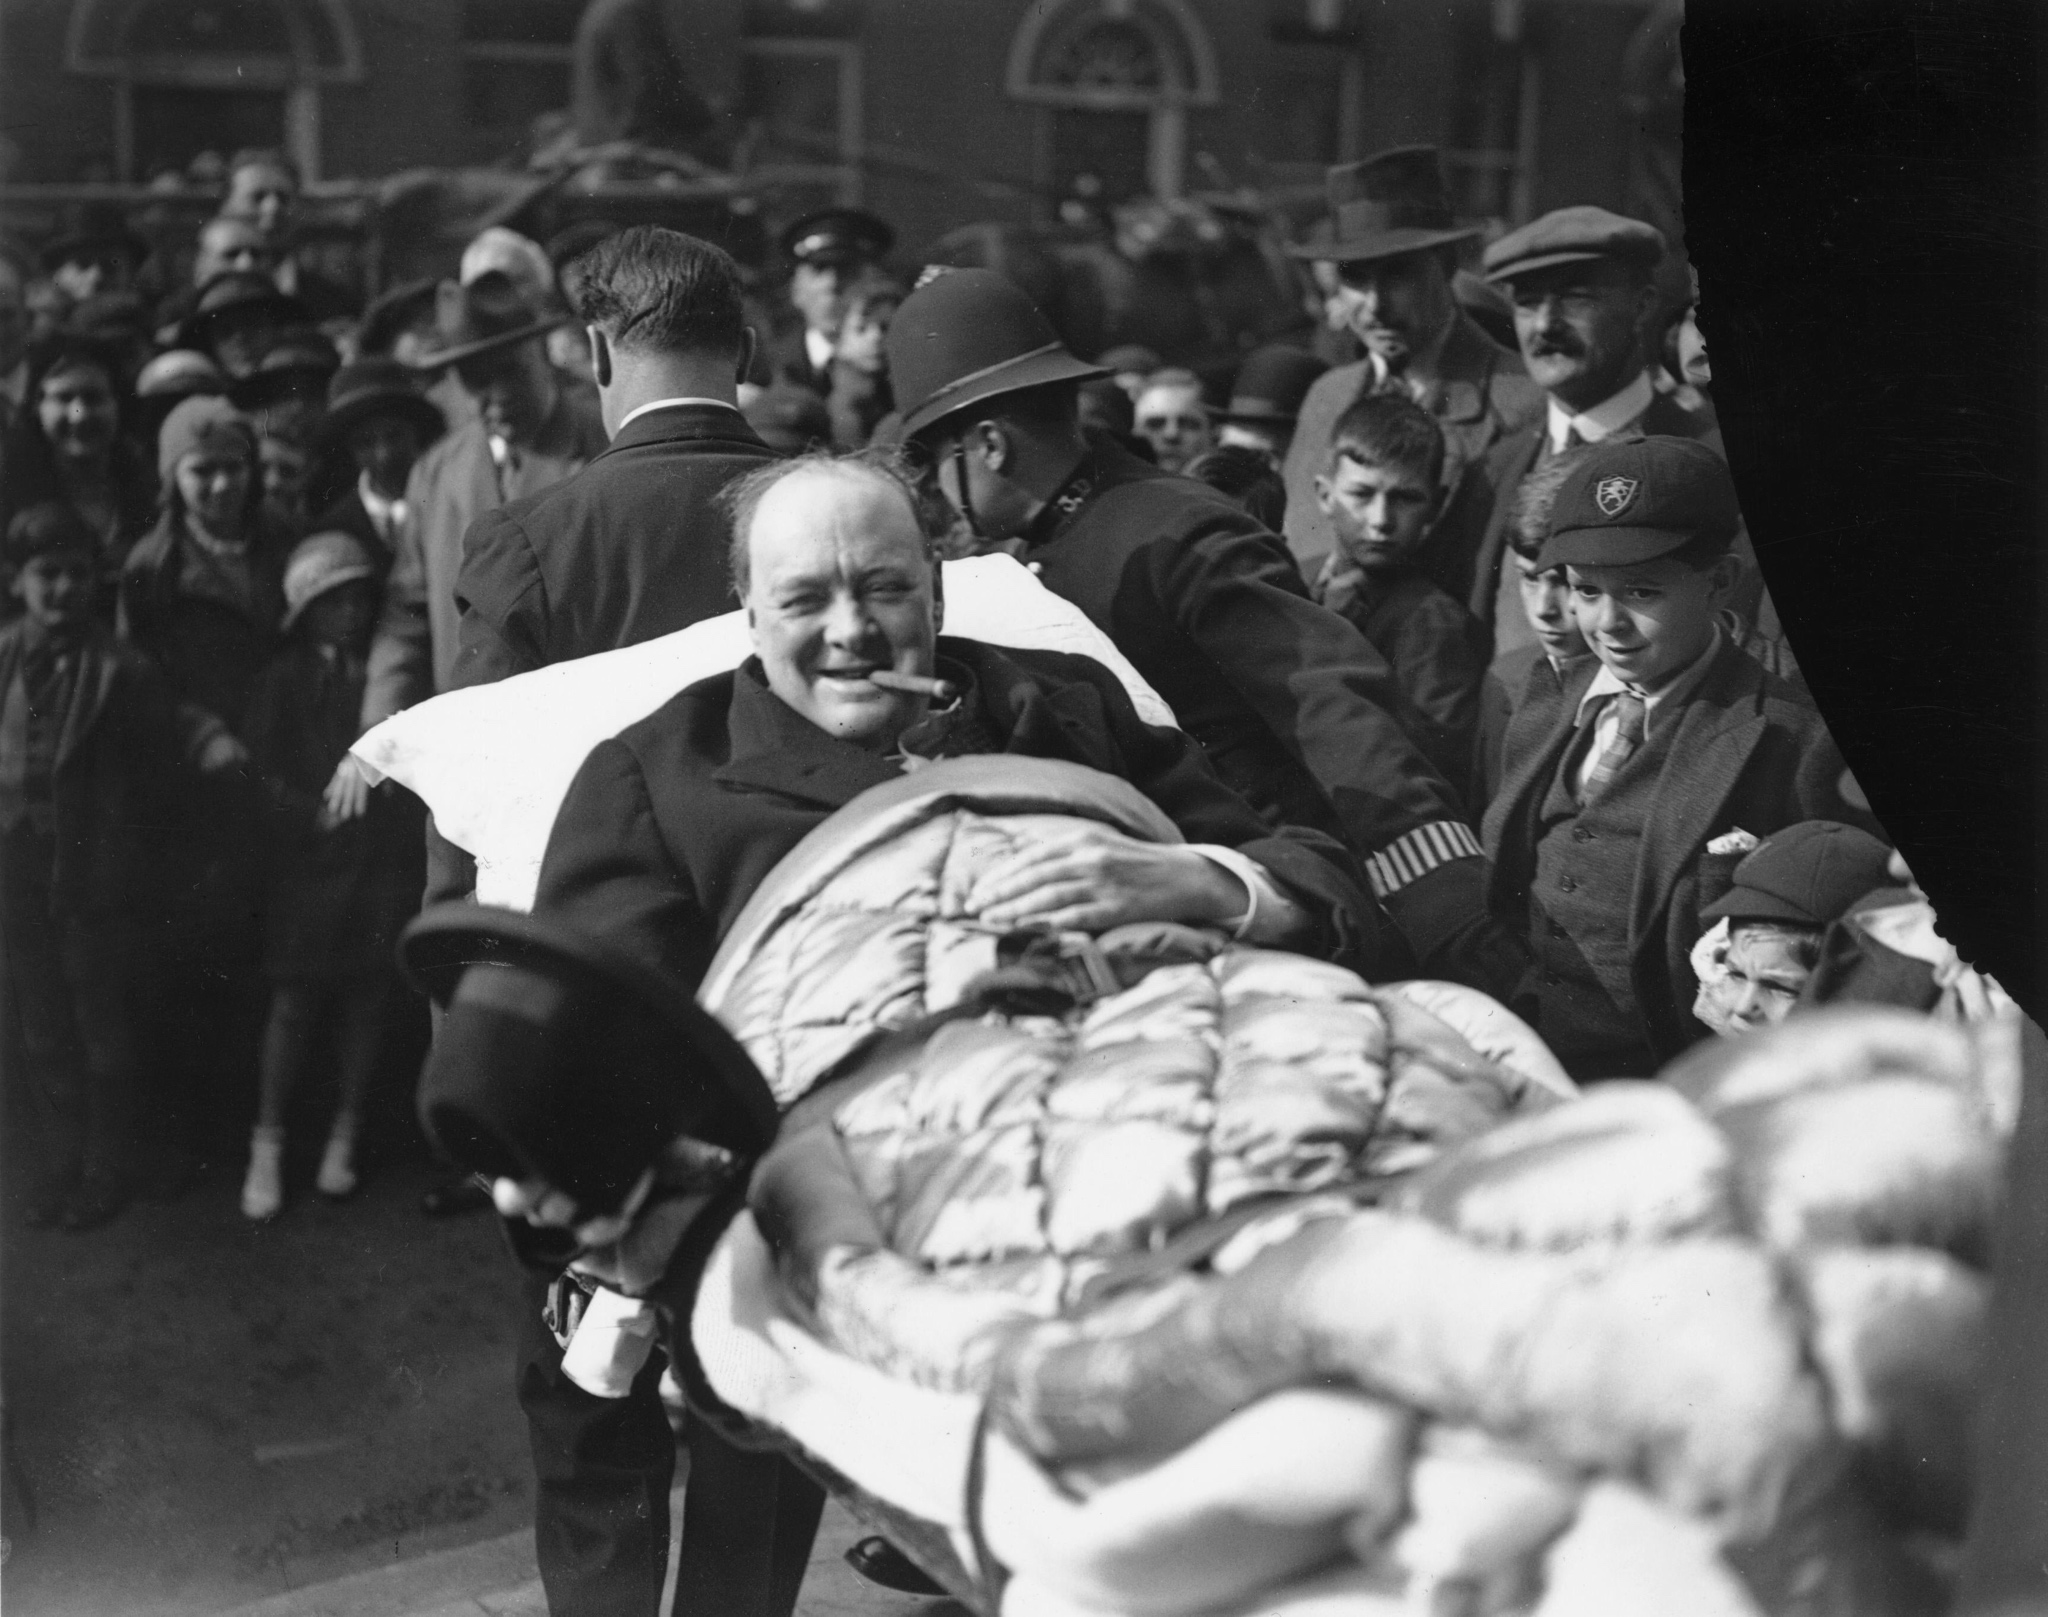 Winston Churchill after getting hit by a car in New York.